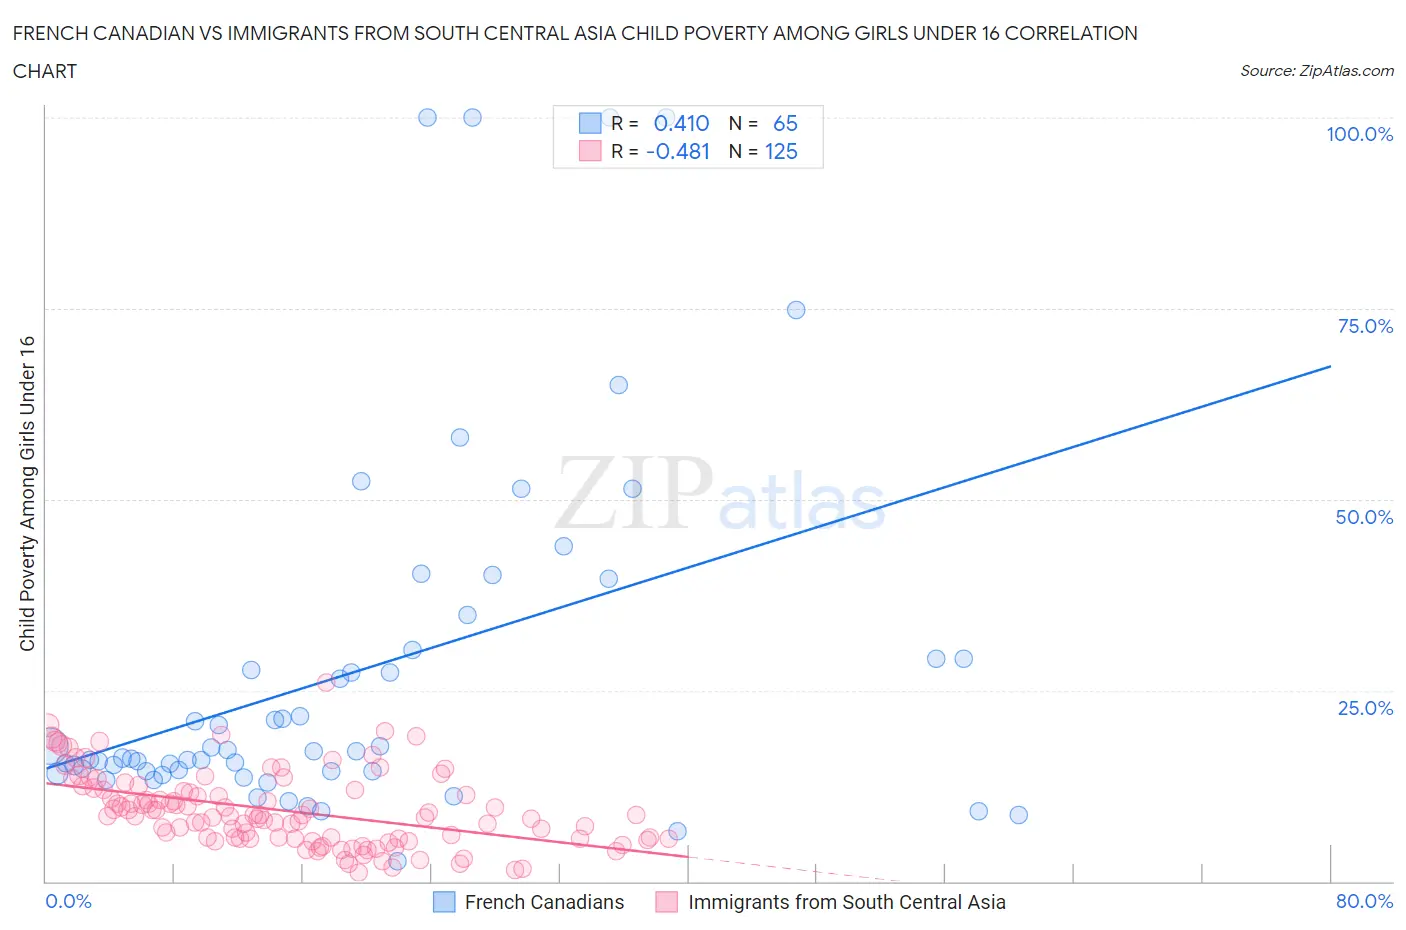 French Canadian vs Immigrants from South Central Asia Child Poverty Among Girls Under 16